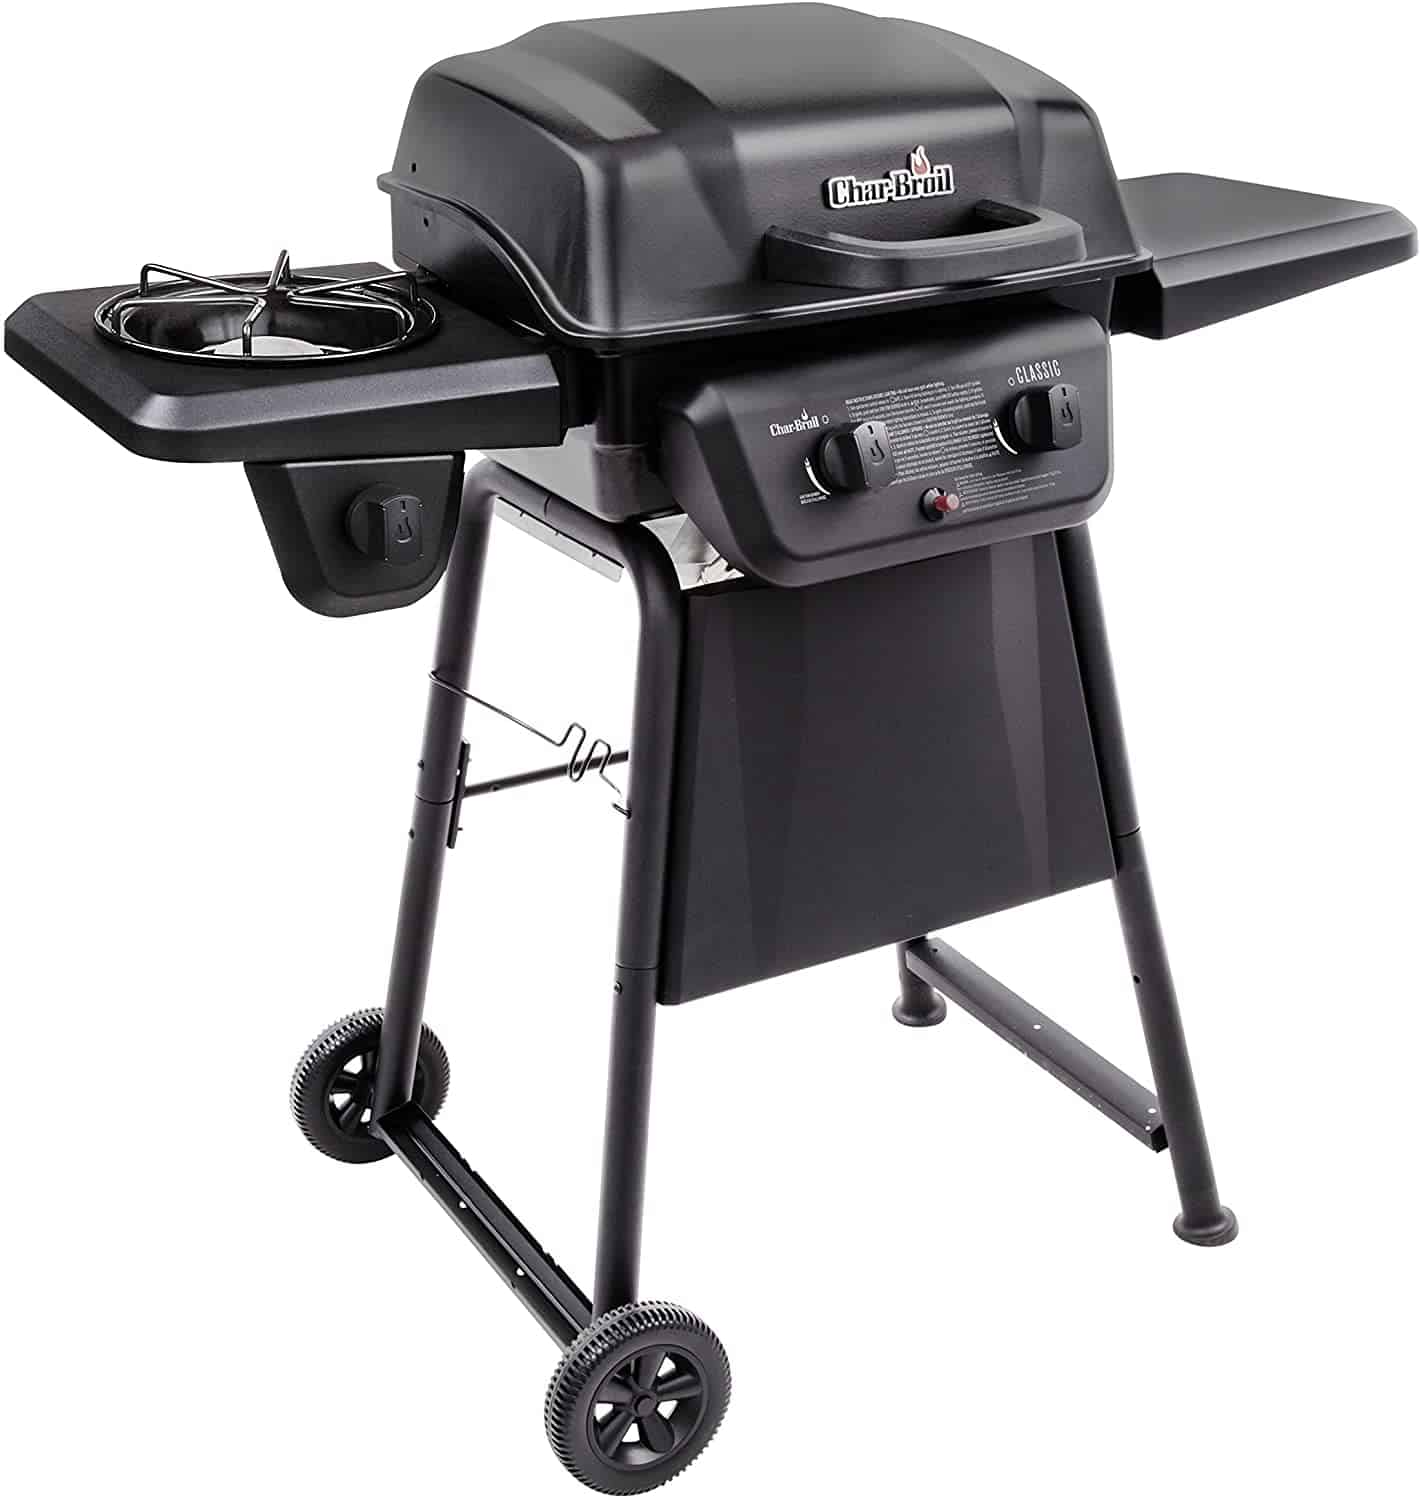 Best 2-burner gas grill under $200- Char-Broil Classic 280